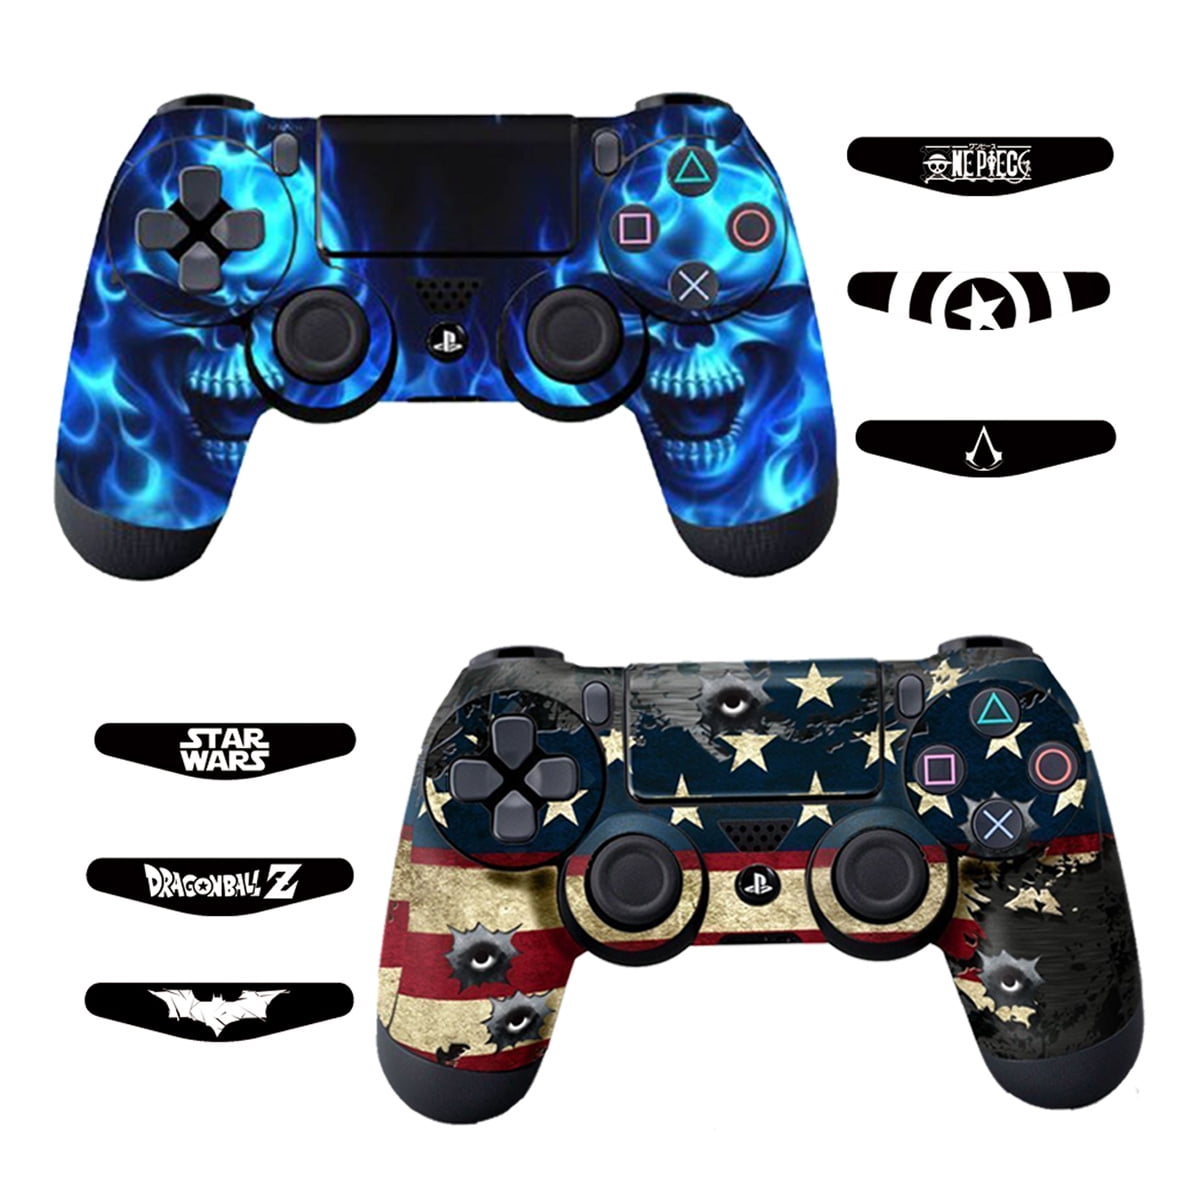 PS4 Skins Playstation 4 Games Sony PS4 Games Decals Custom PS4 Controller  Stickers PS4 Remote Controller Skin Playstation 4 Controller Dualshock 4  Vinyl Decal - Joker Batman 